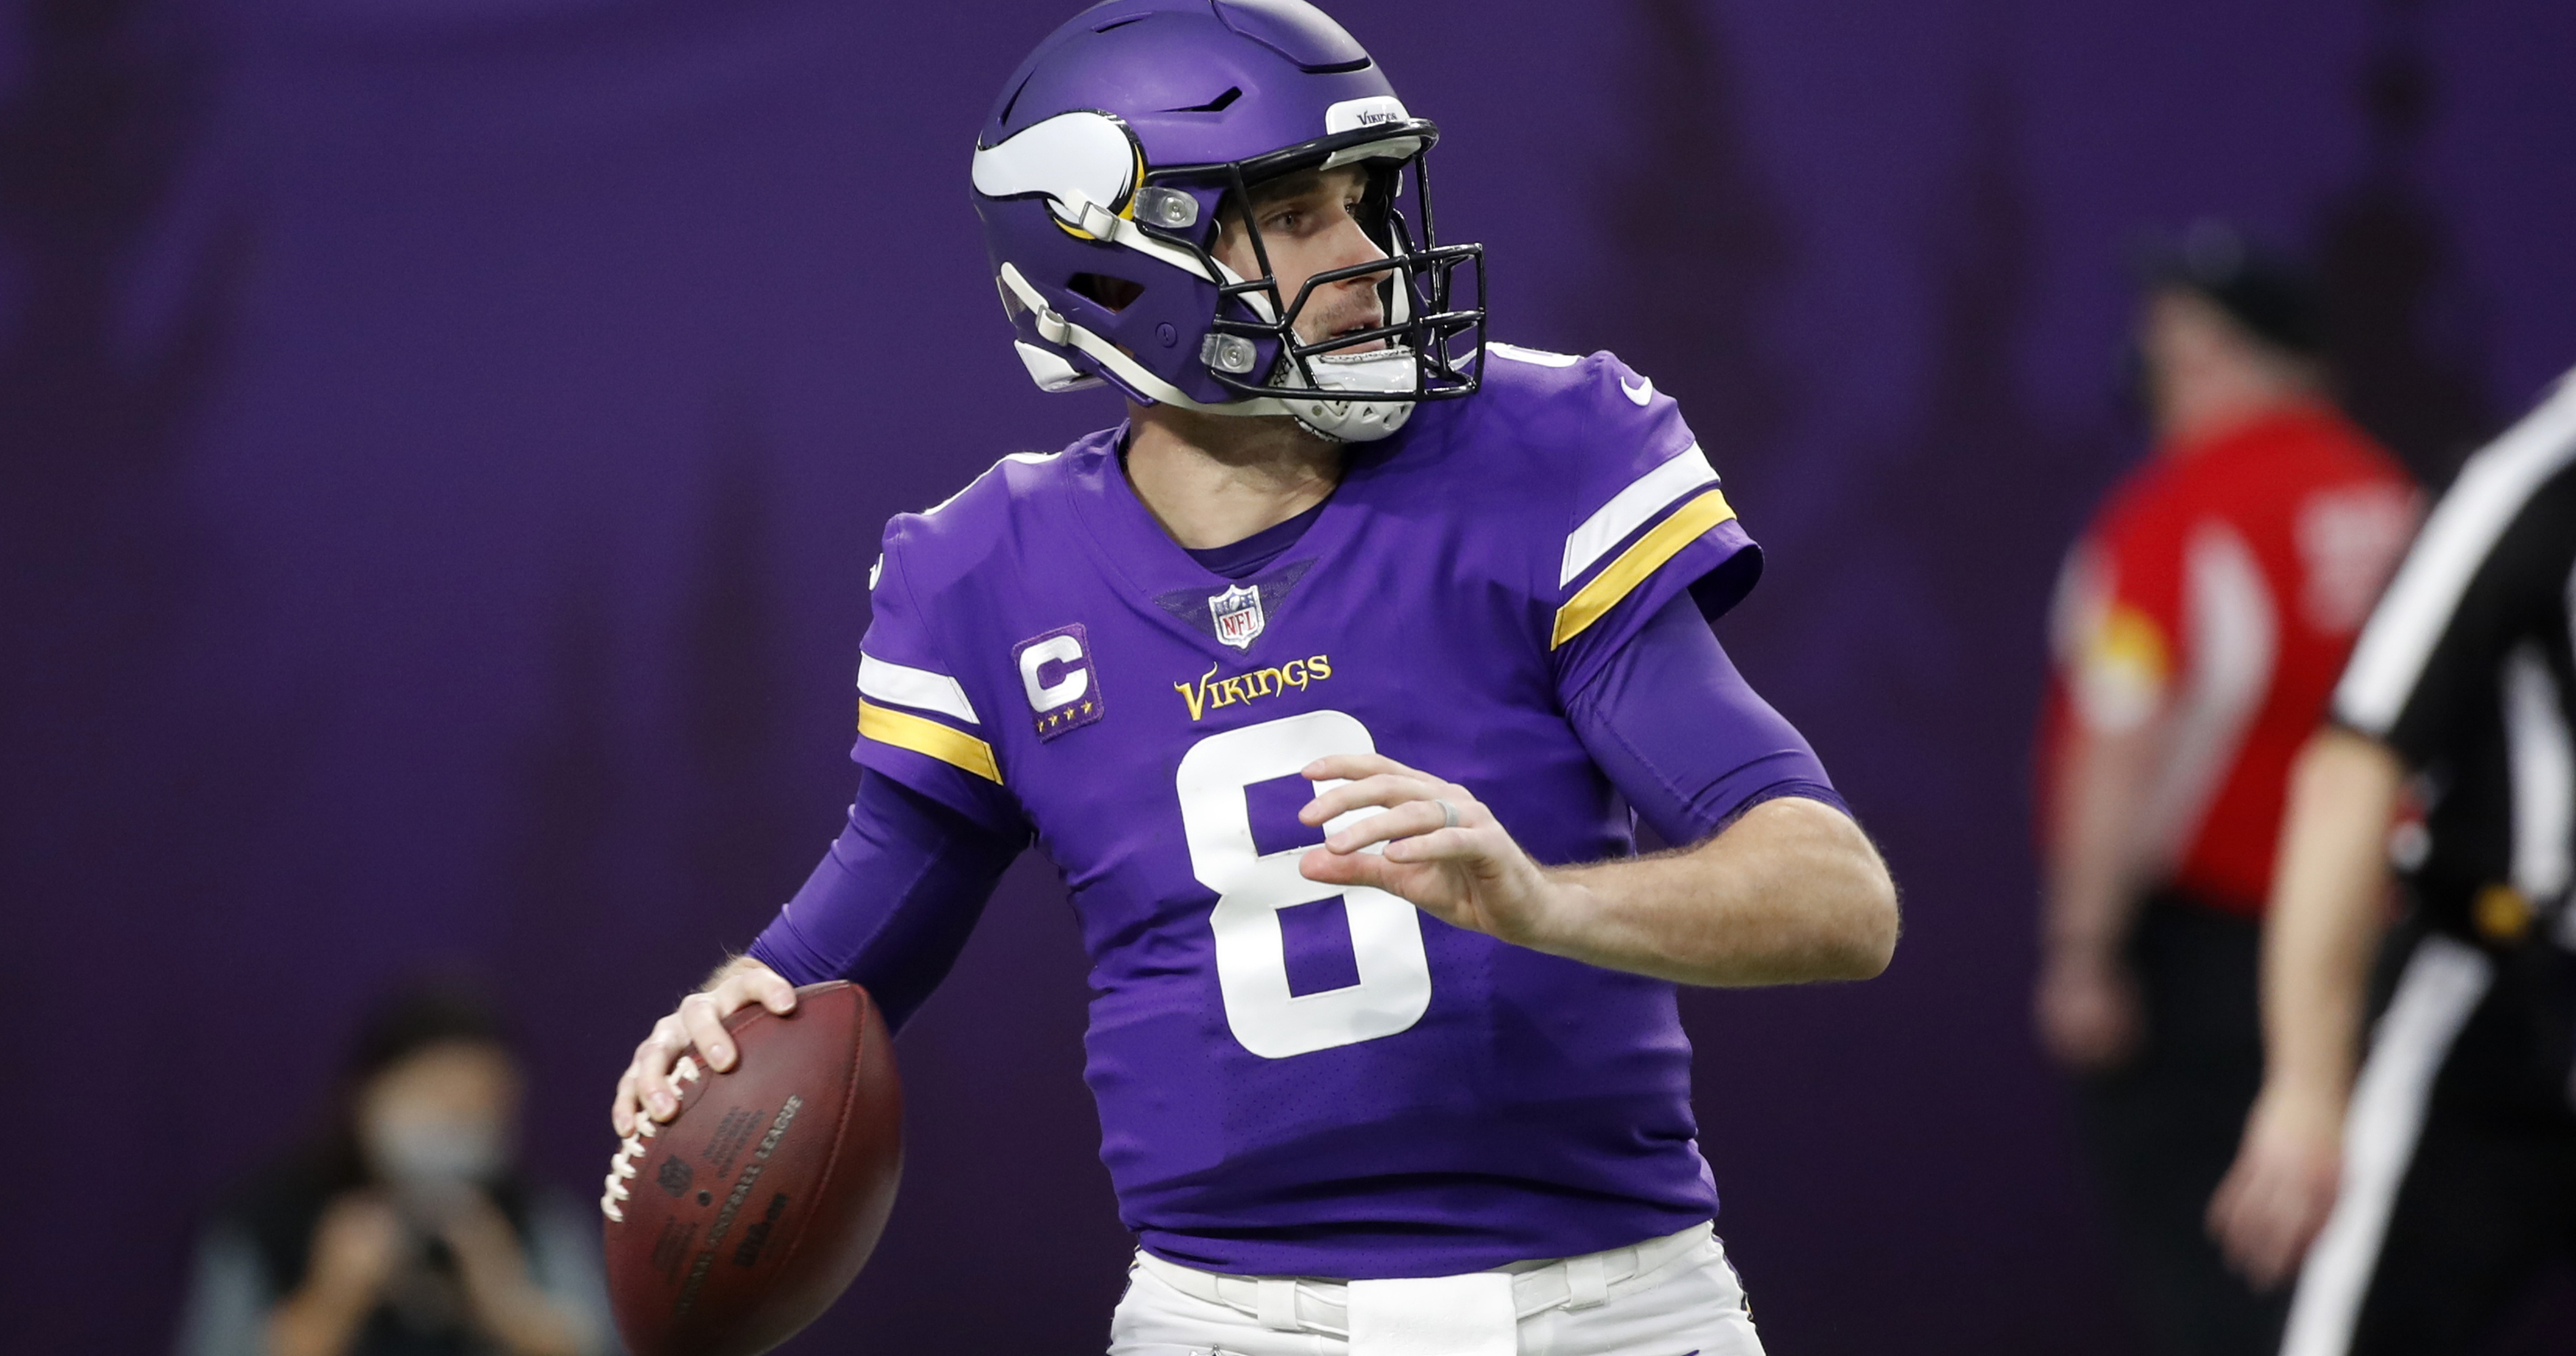 Vikings' Kirk Cousins named to Pro Bowl as replacement for Packers